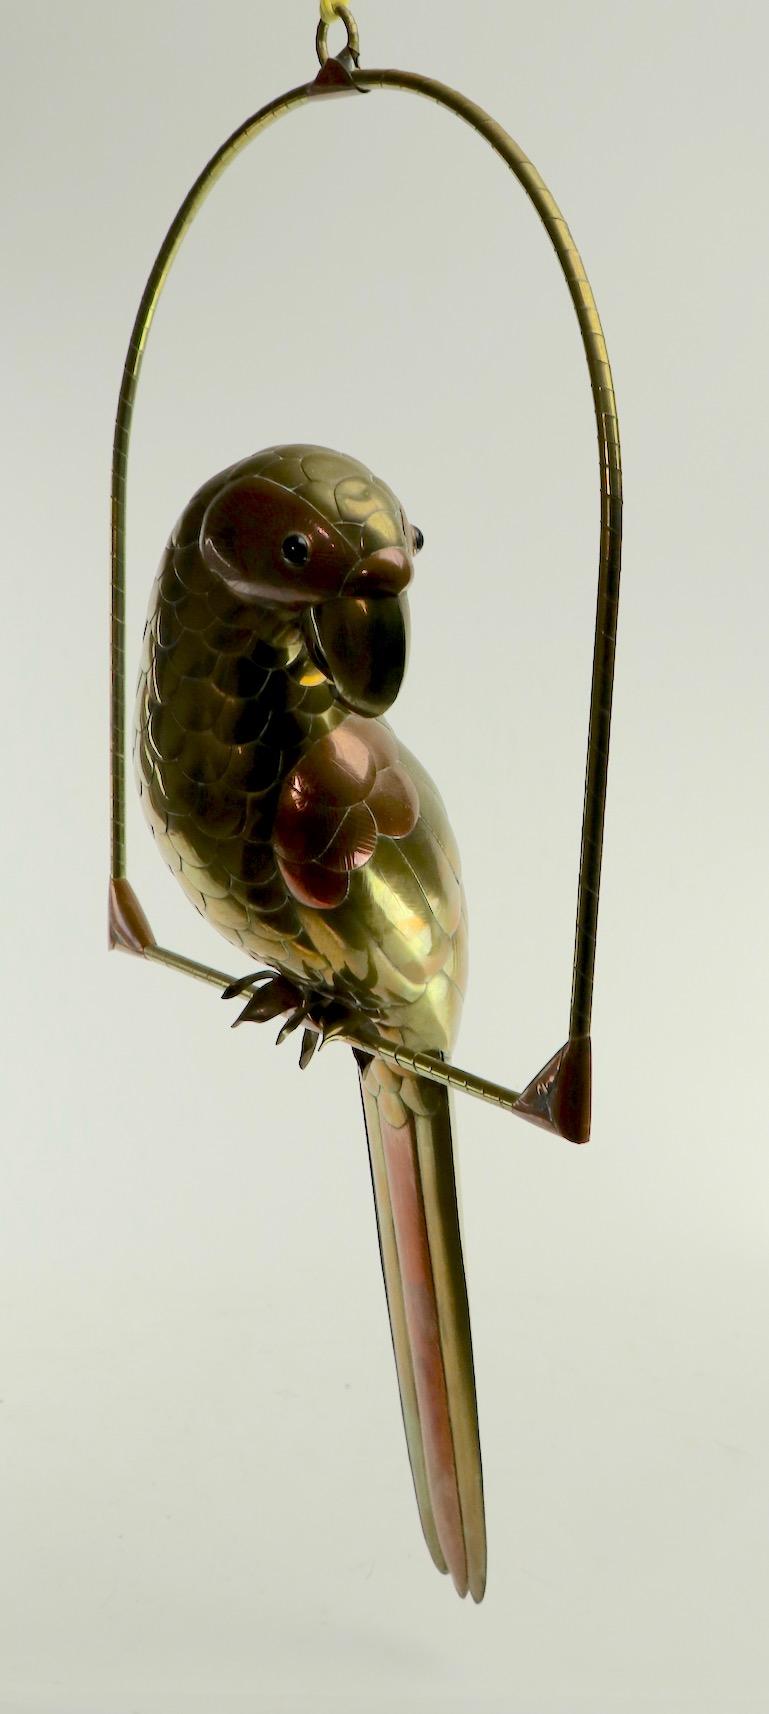 Mixed metal sculpture of a parrot on a swing by recognized master Sergio Bustamante. Very good original condition, having only one slight, insignificant dent on top of head of bird, as shown in images. Classic 1970s metalwork, nice decorative